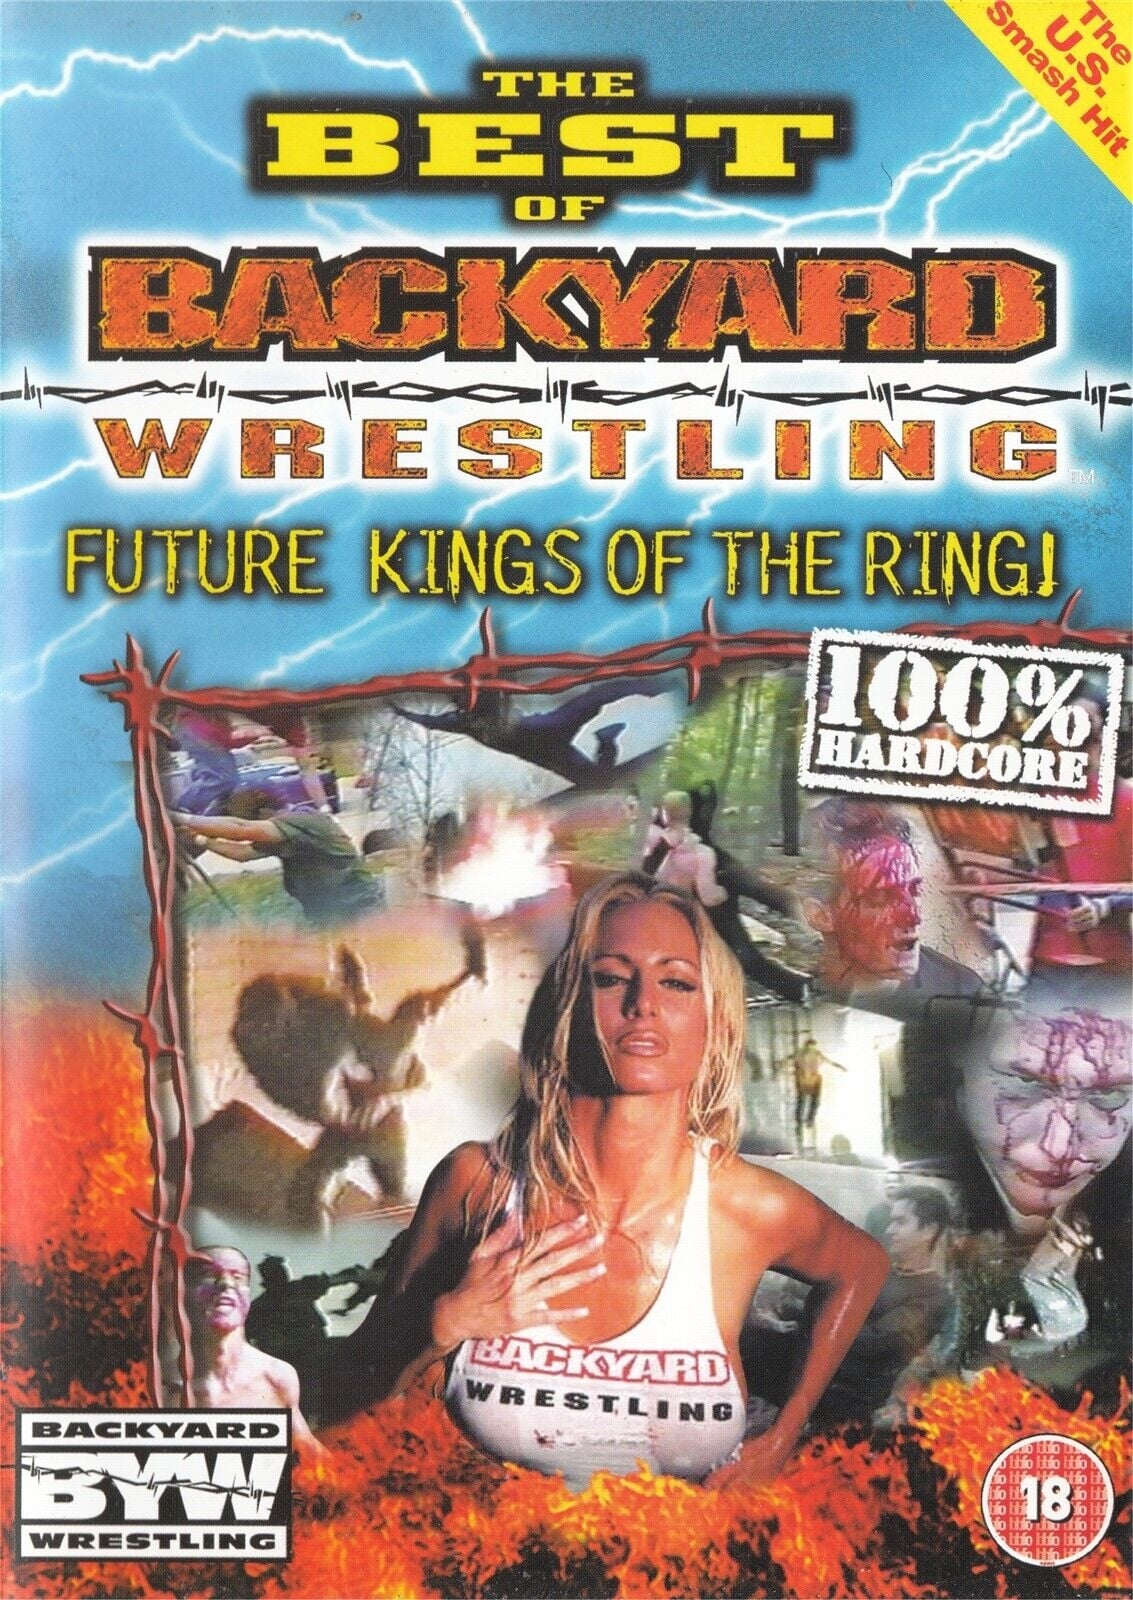 The Best Of Backyard Wrestling: Future Kings Of The Ring